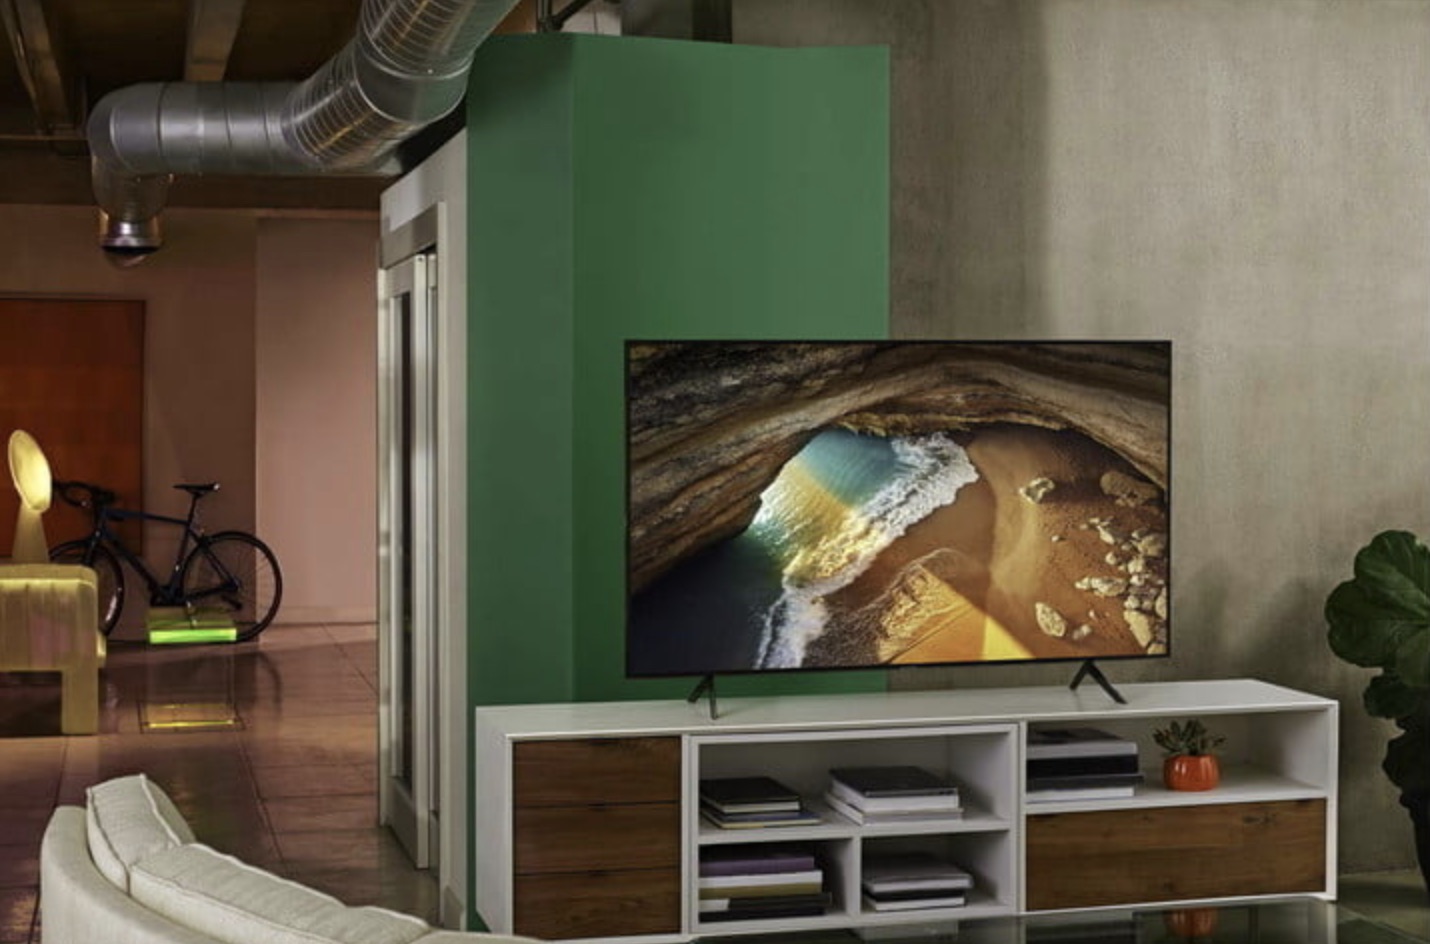 The Samsung Q70A 4K TV on a media console in a modern loft-style dwelling.